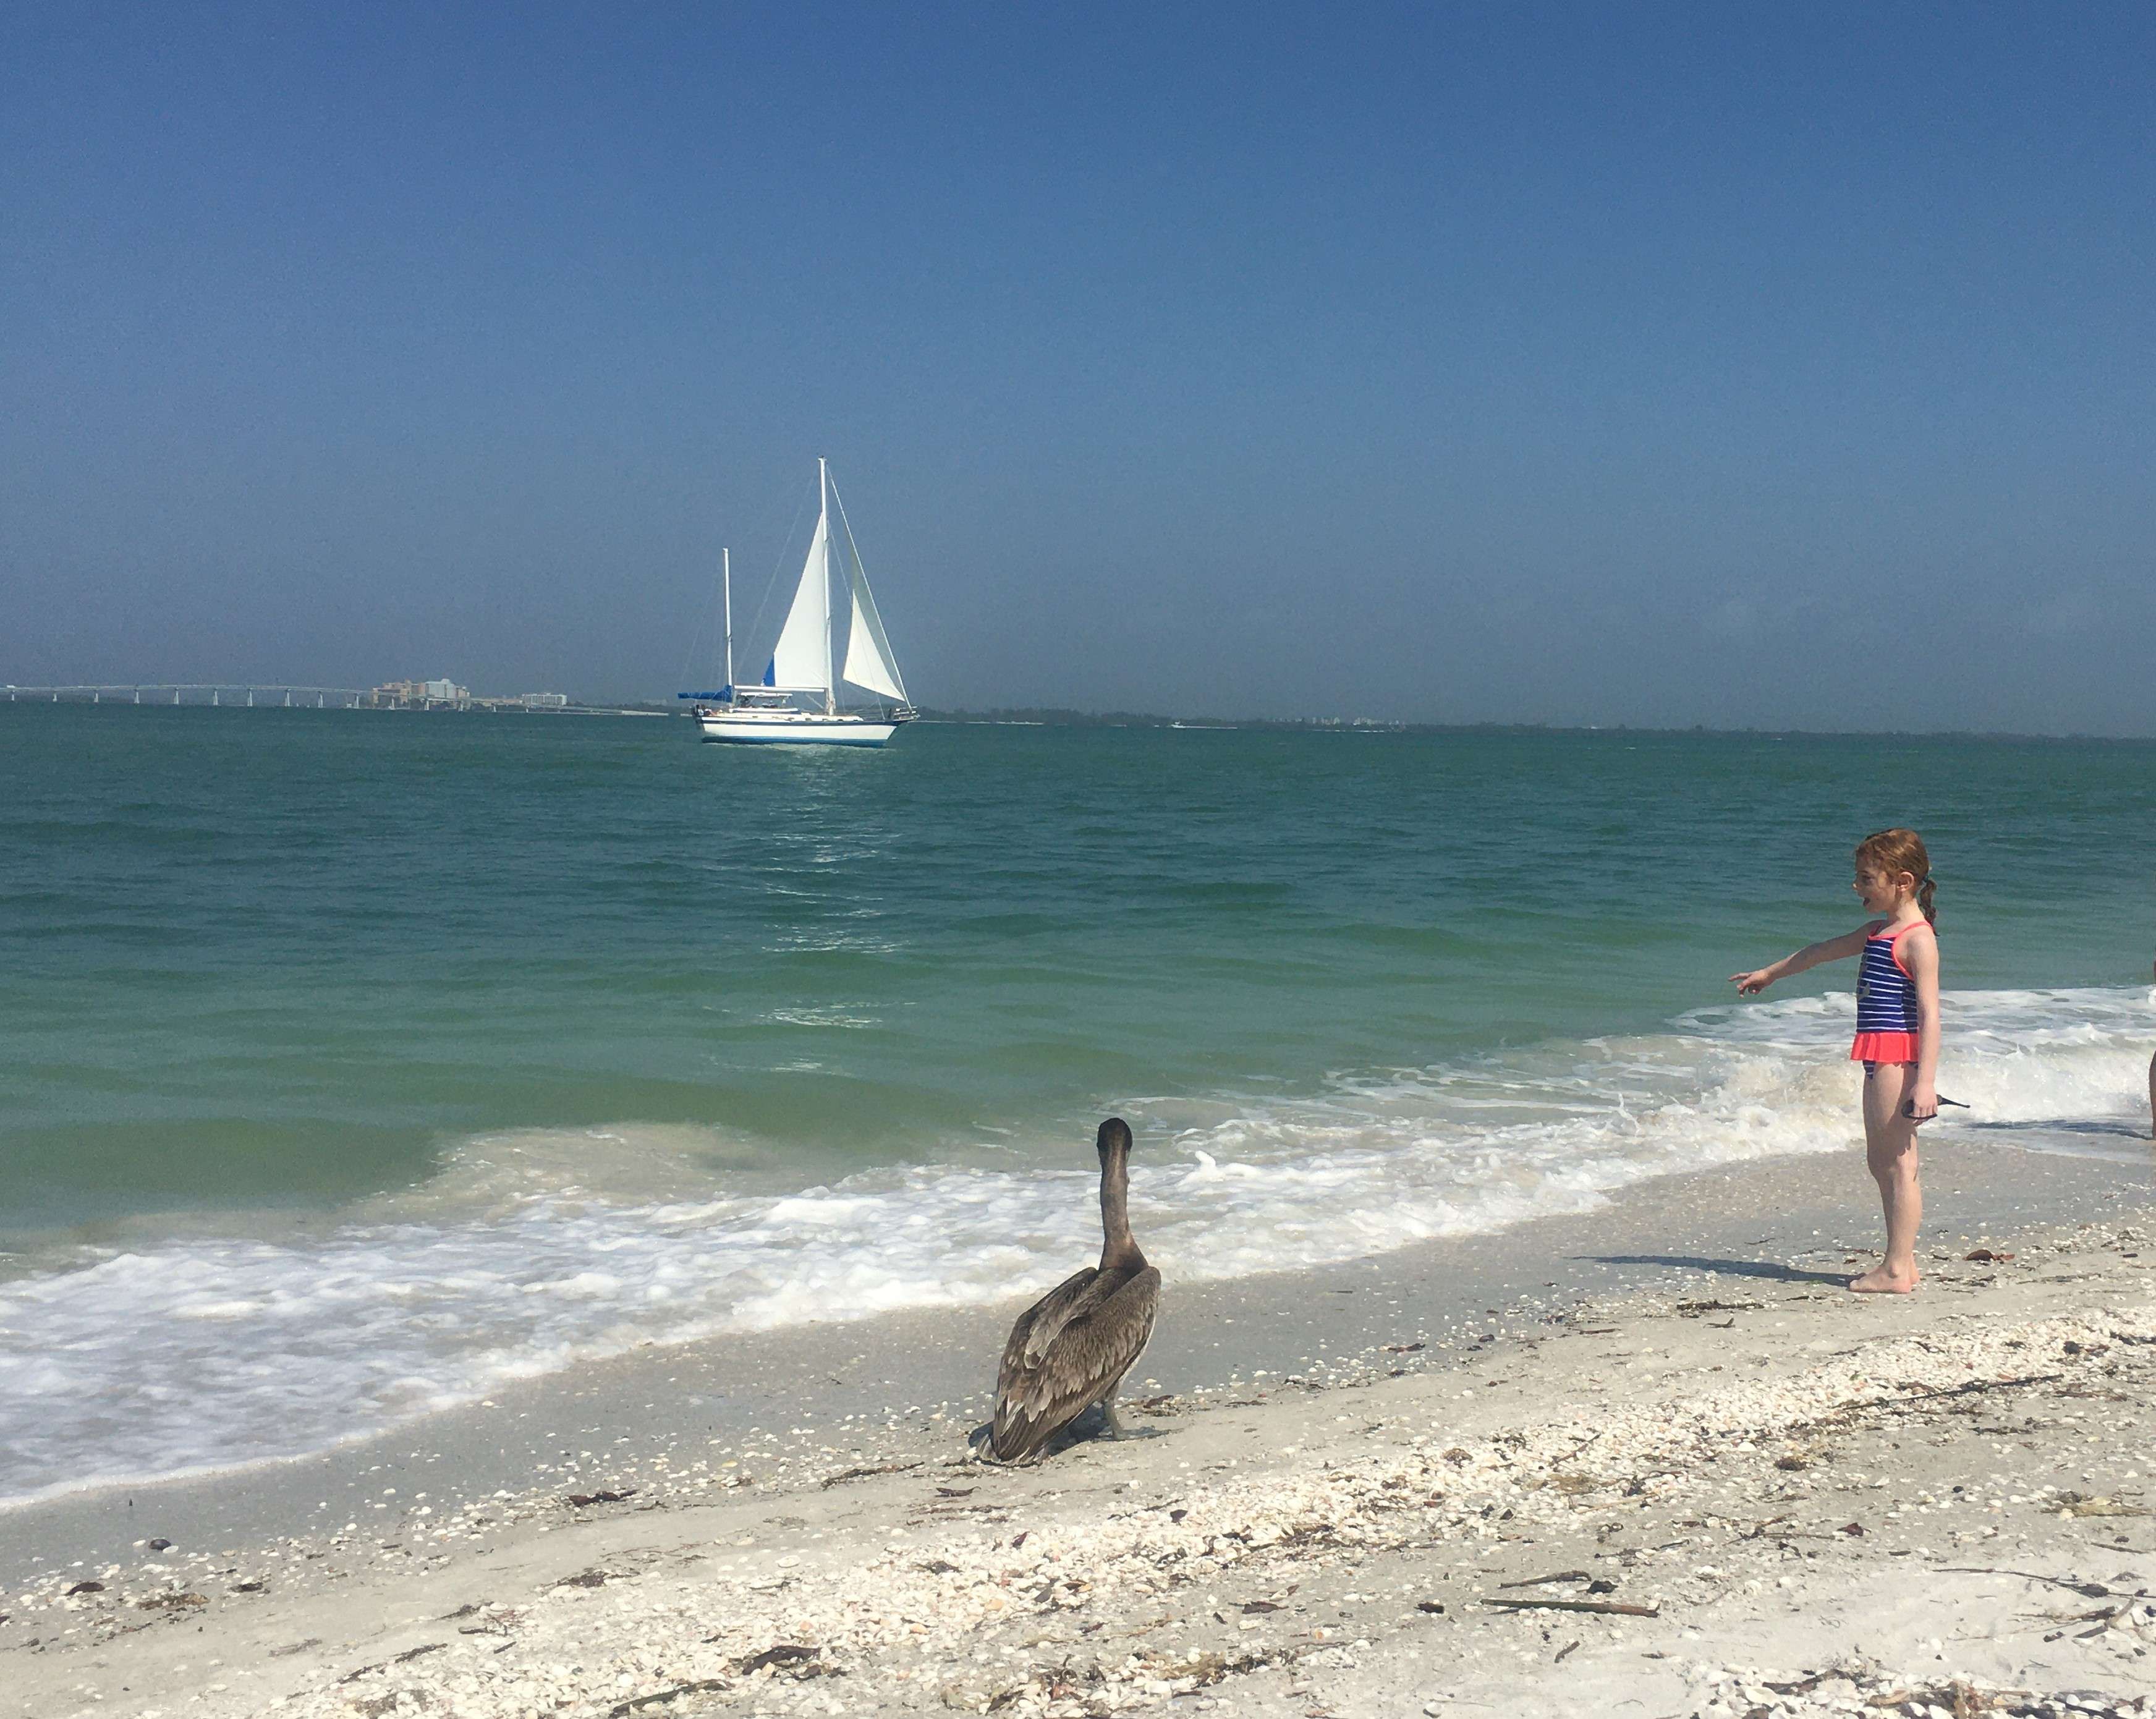 A pelican and a girl